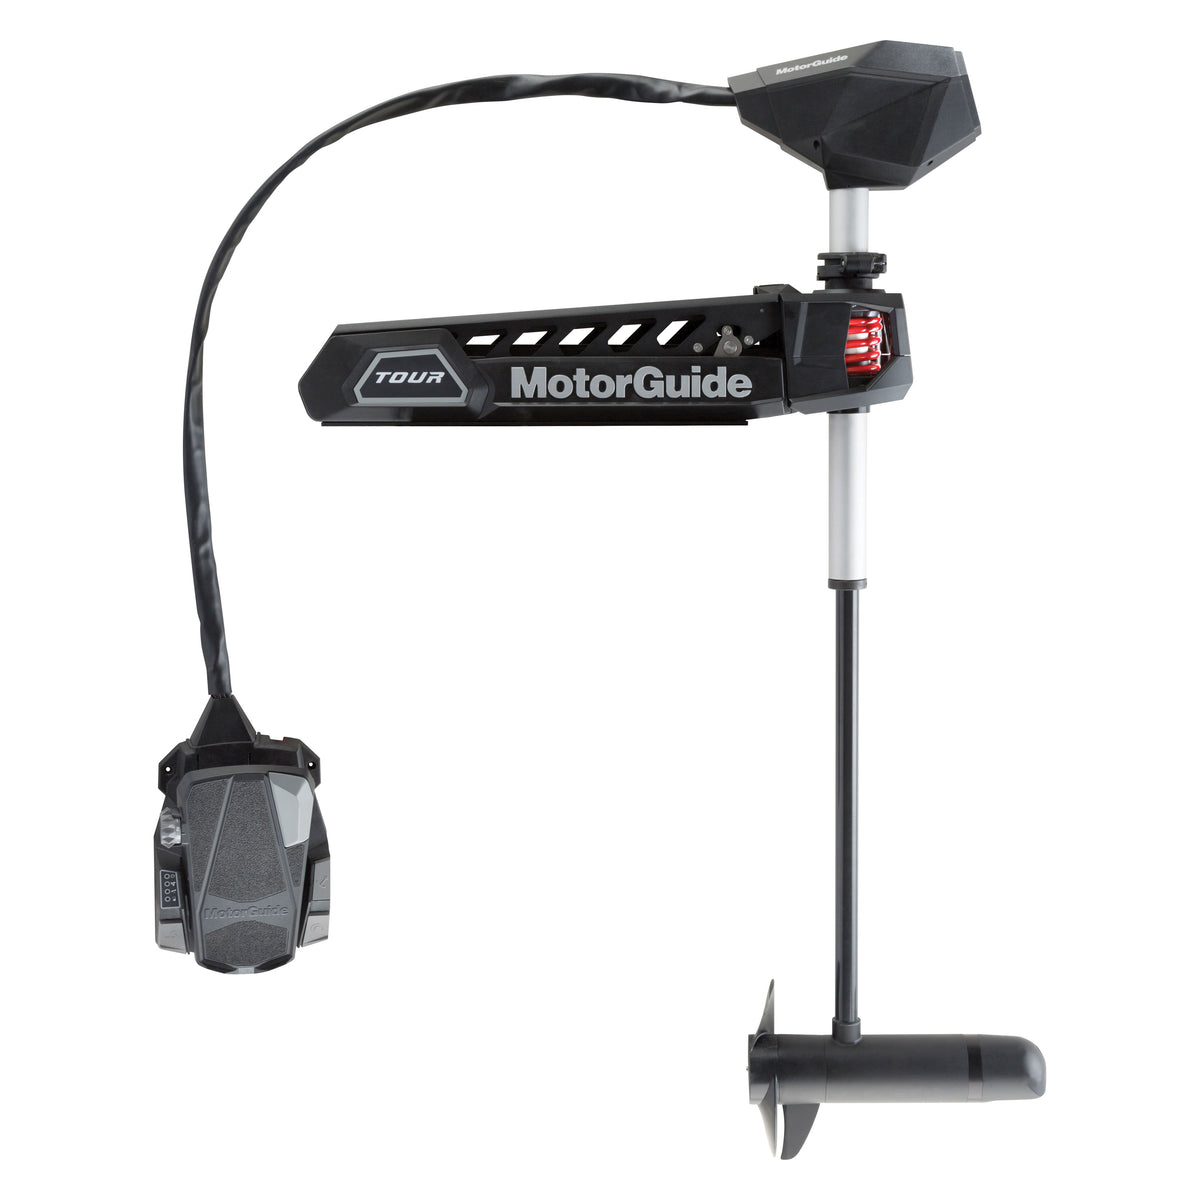 MotorGuide 941900050 Tour Pro Trolling Motor TR PRO-109 45" with Pinpoint GPS, HD+ Universal Sonar - 36V